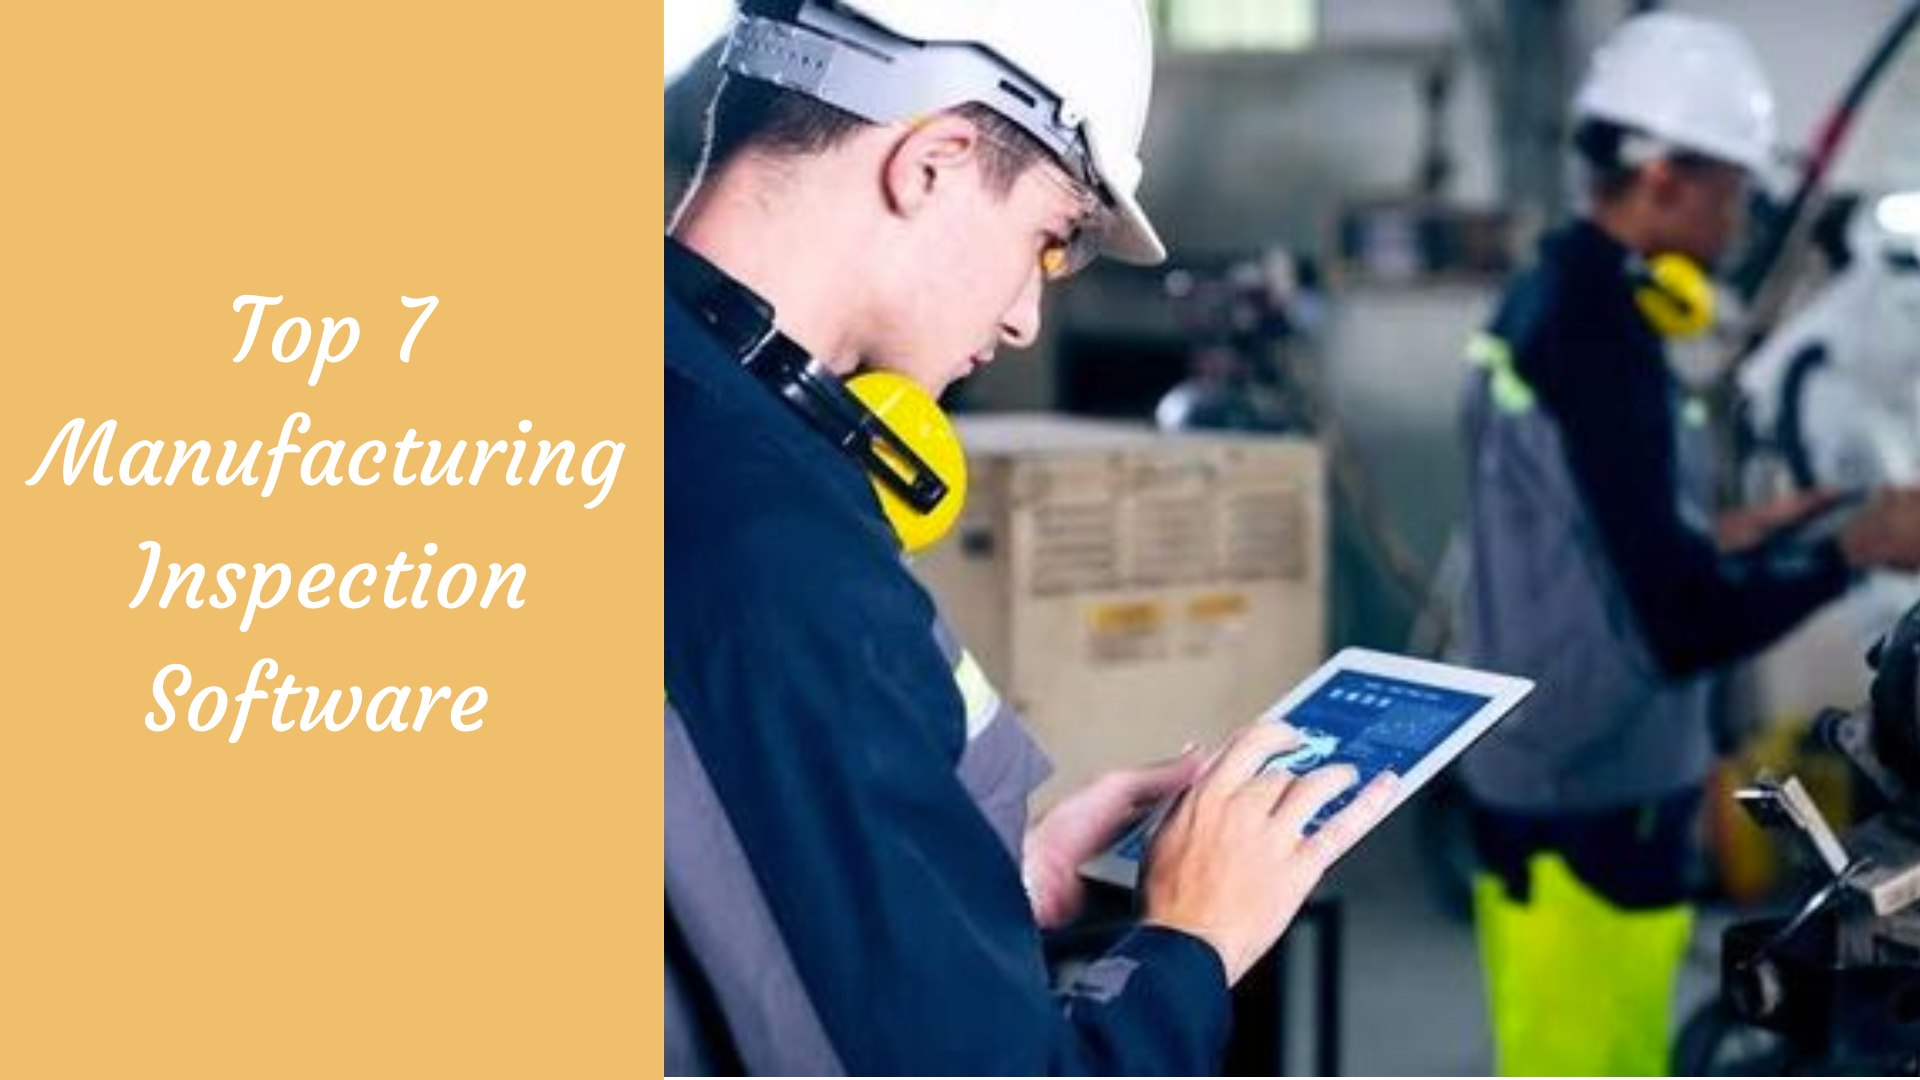 Top 7 Manufacturing Inspection Software